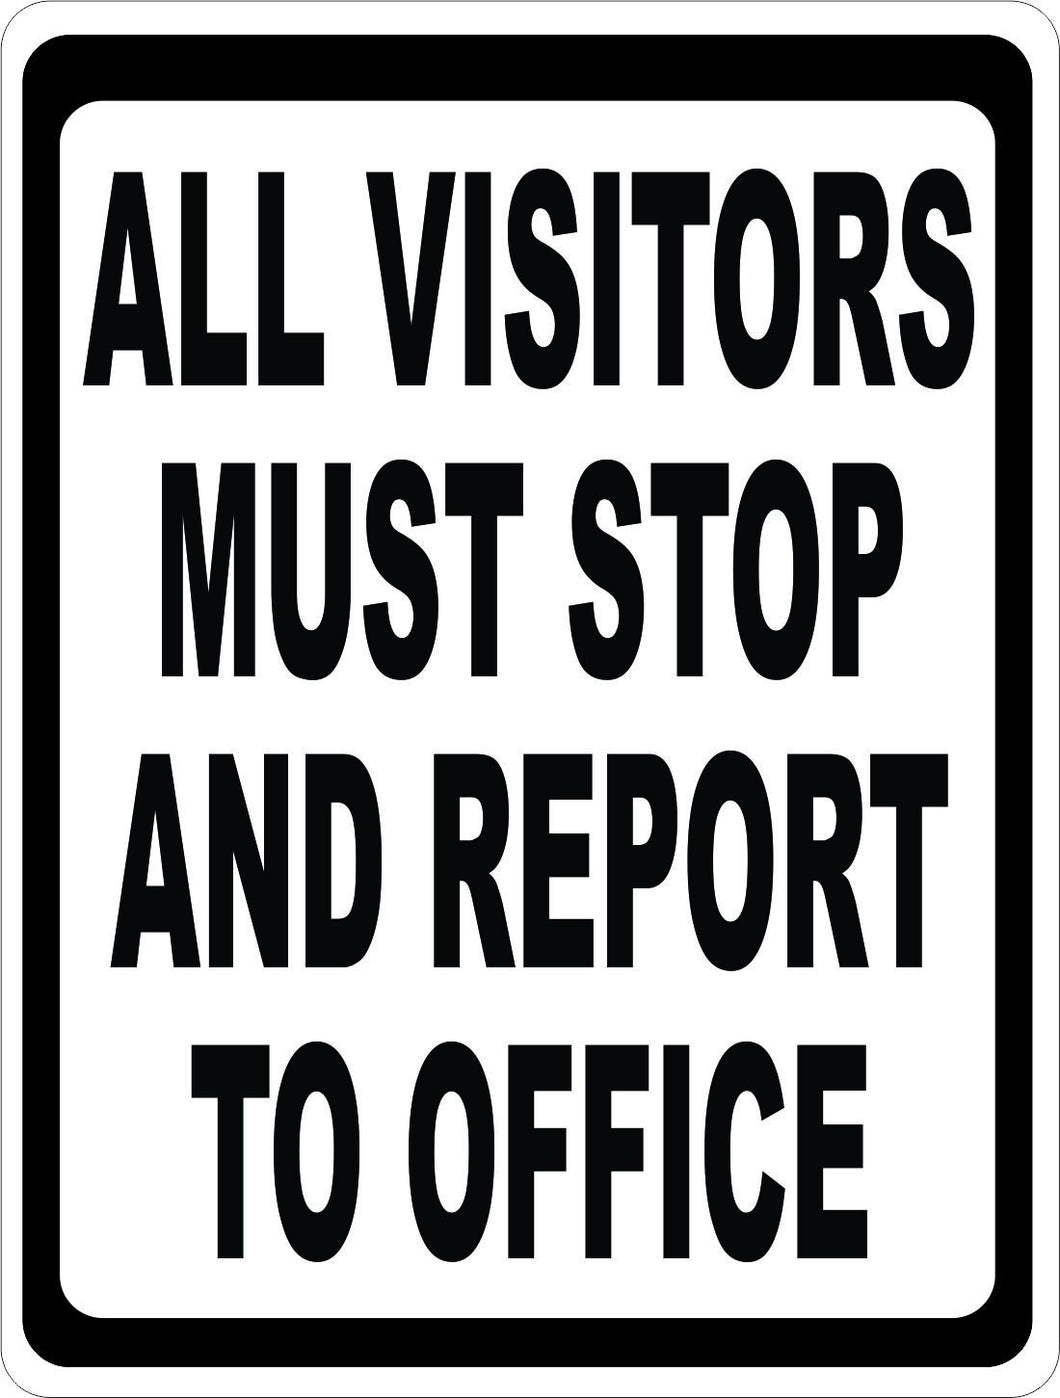 All Visitors Must Stop and Report to Office Sign - Signs & Decals by SalaGraphics